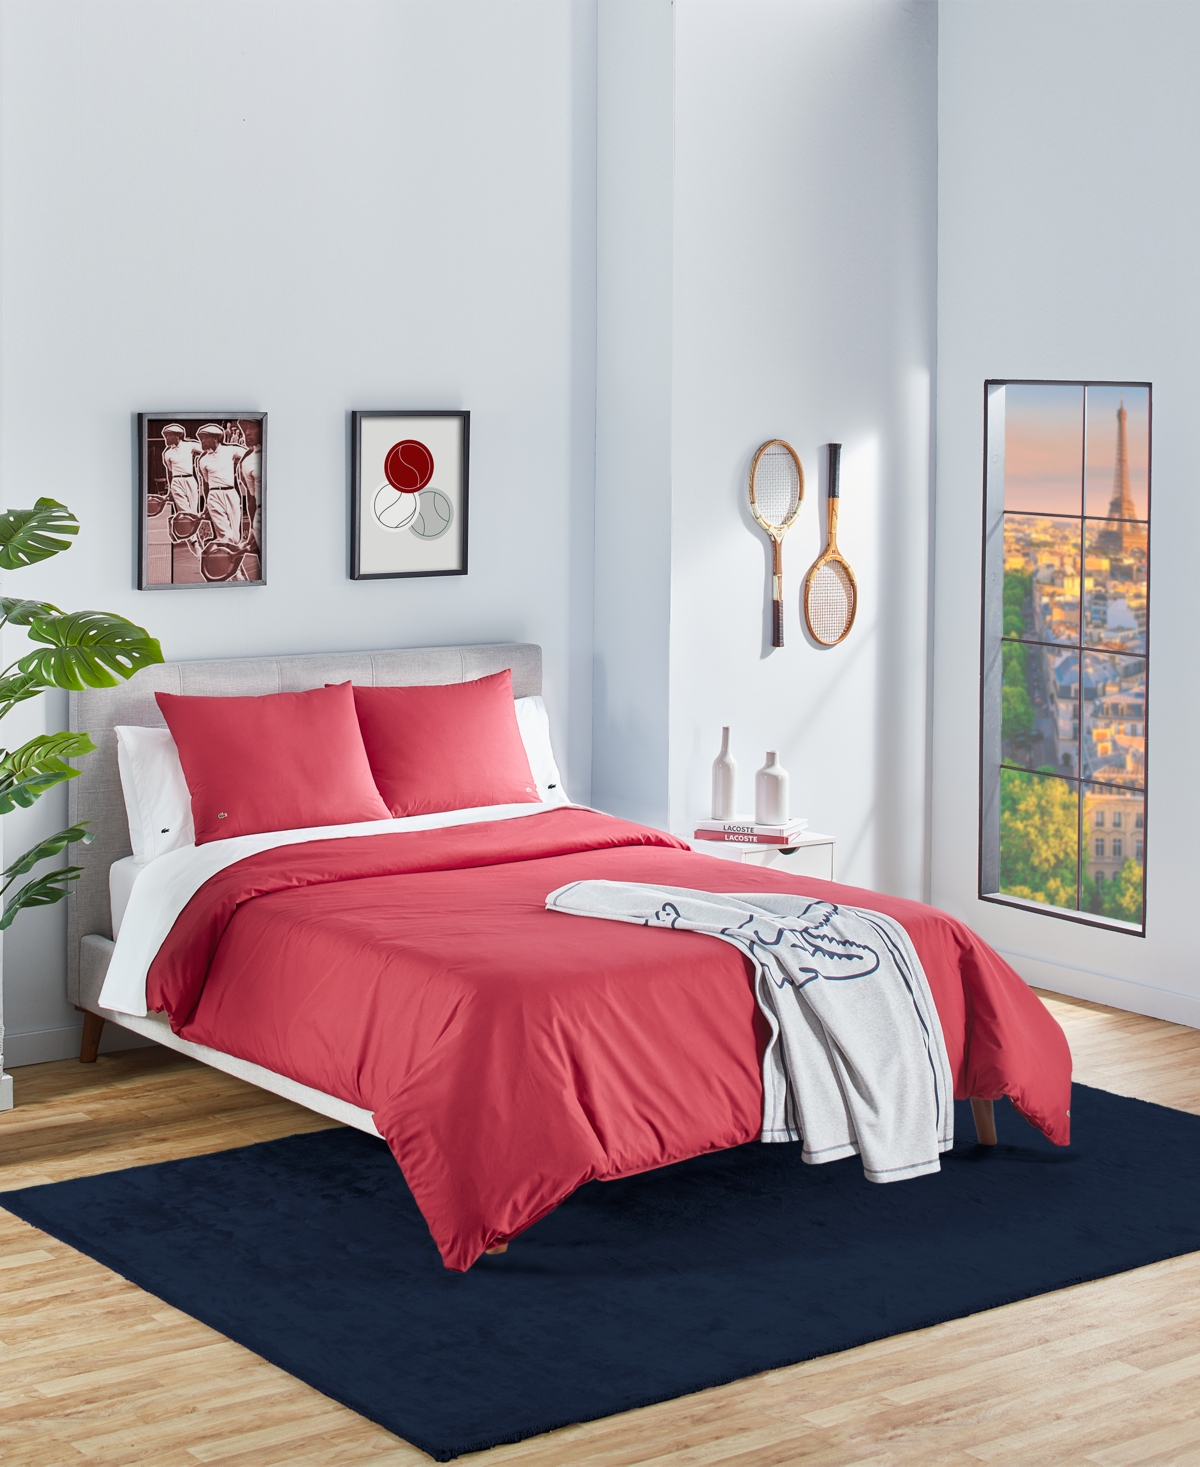 Lacoste Percale 3 Piece Duvet Set, King In Chili Pepper